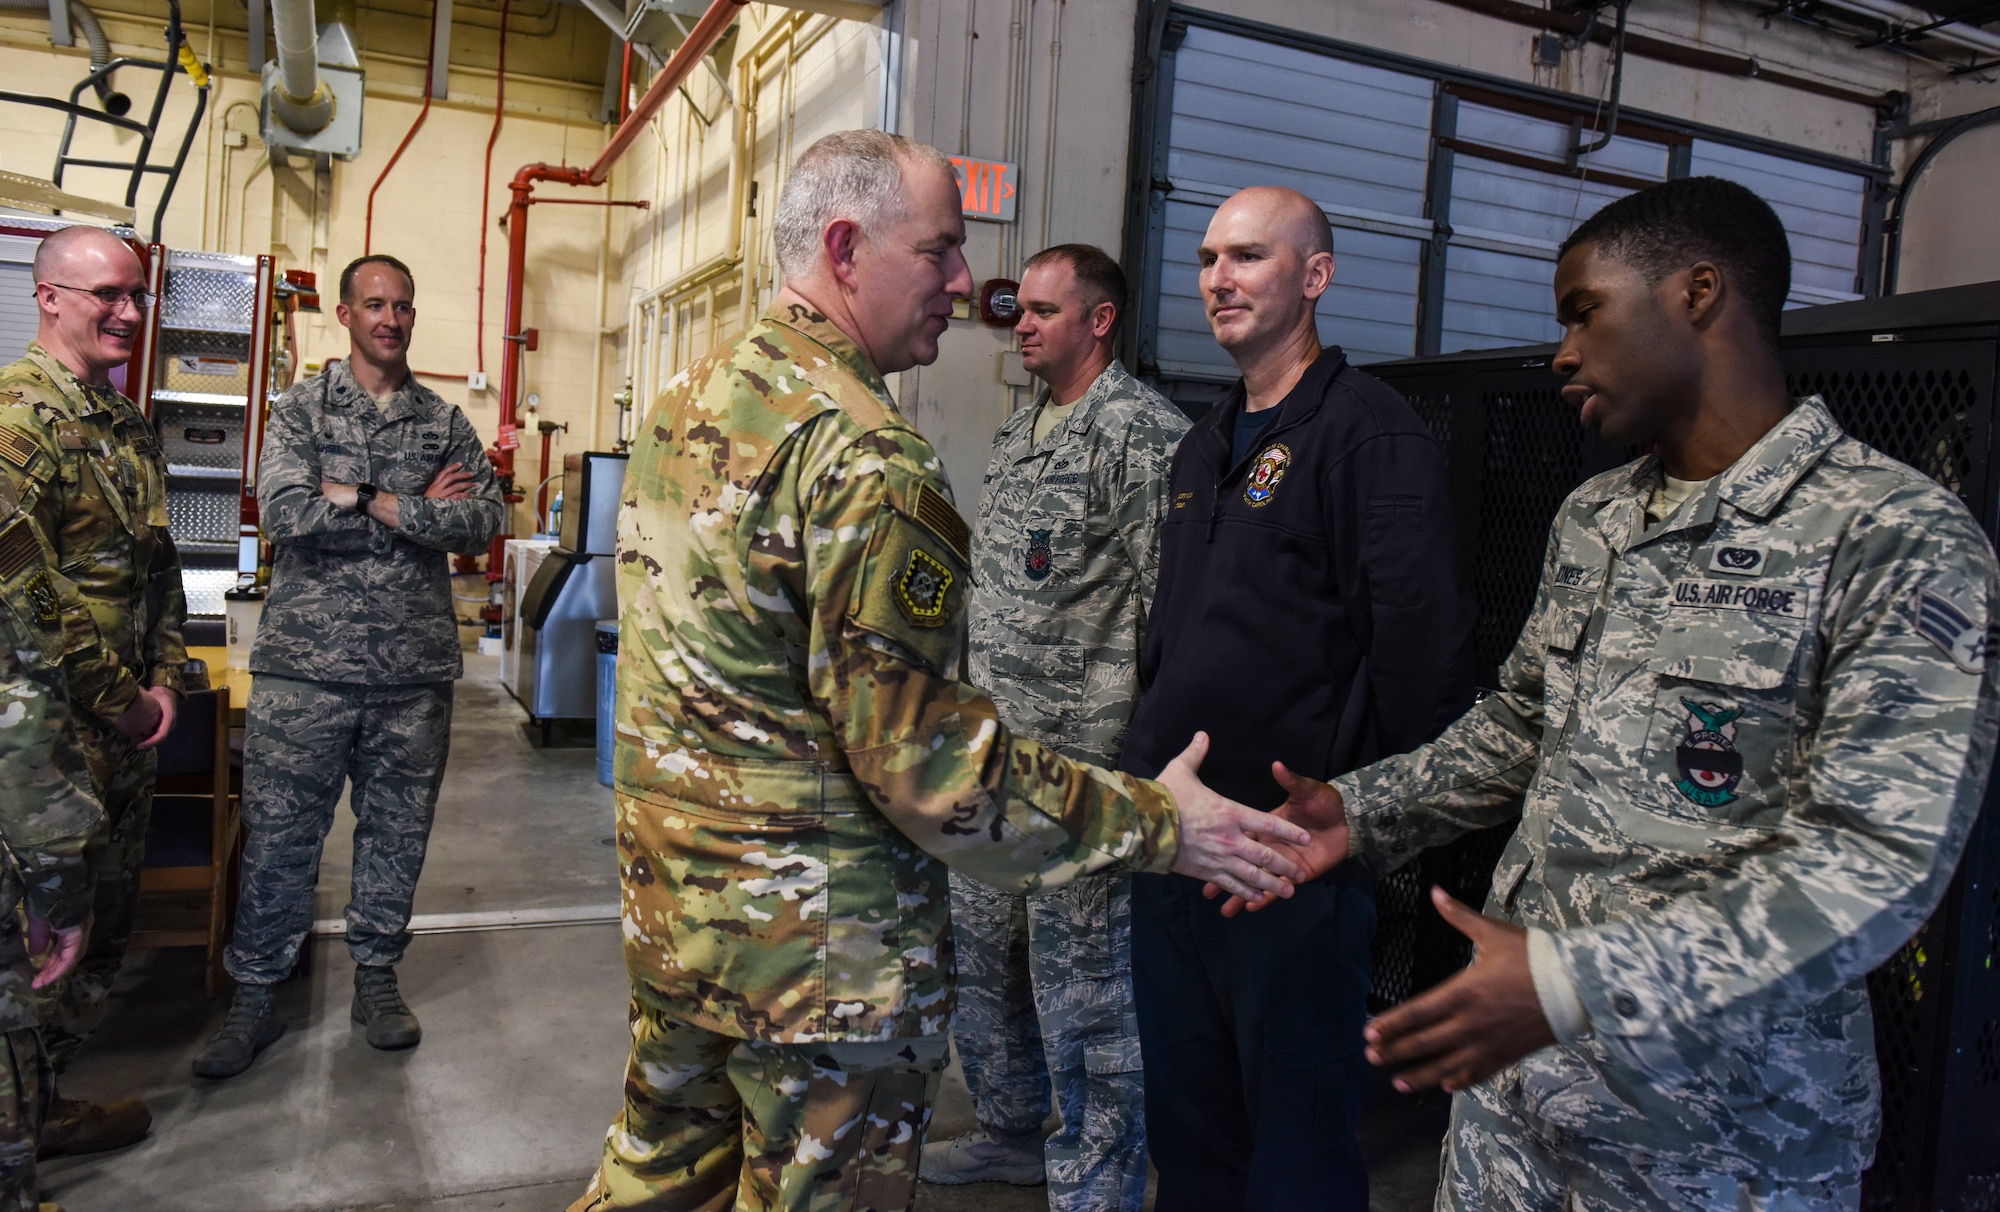 Maj. Gen. John Gordy, U.S. Air Force Expeditionary Center commander, thanks Airmen for their service Dec. 10, 2019, at Joint Base Charleston, S.C. During USAF EC leadership’s visit, they toured various facilities across the installation for a behind-the-scenes look at base operations and watched service members in action. The USAF EC is the Air Force’s center of excellence for rapid global mobility and agile combat support training and education. The center also has direct oversight for installation support, contingency response and mission sets within the global mobility enterprise.